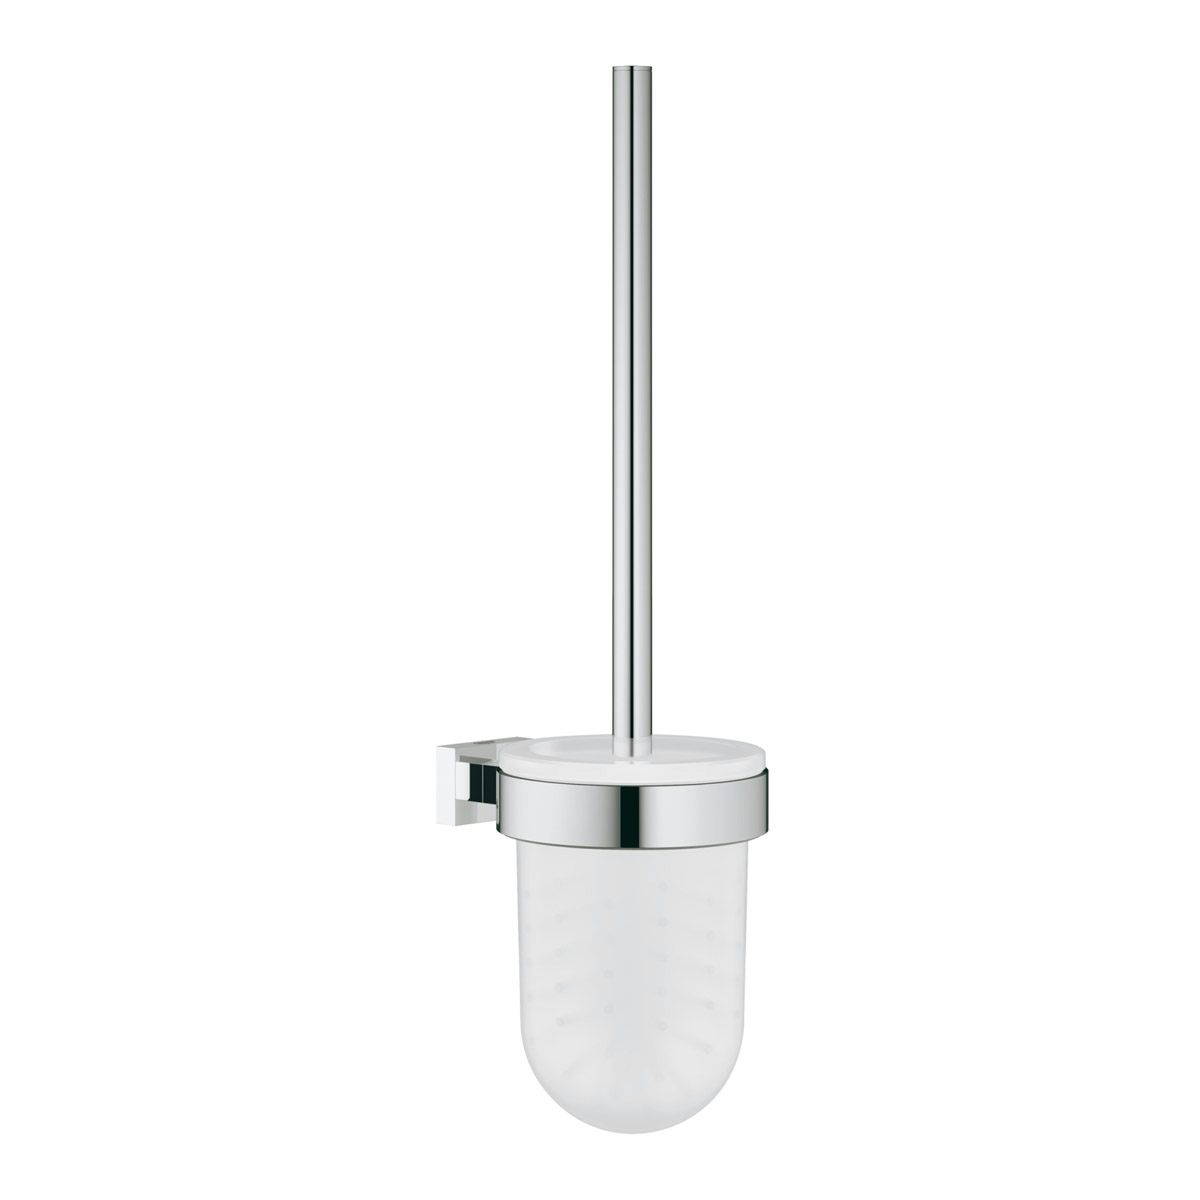 Grohe Essentials Cube toilet brush and holder